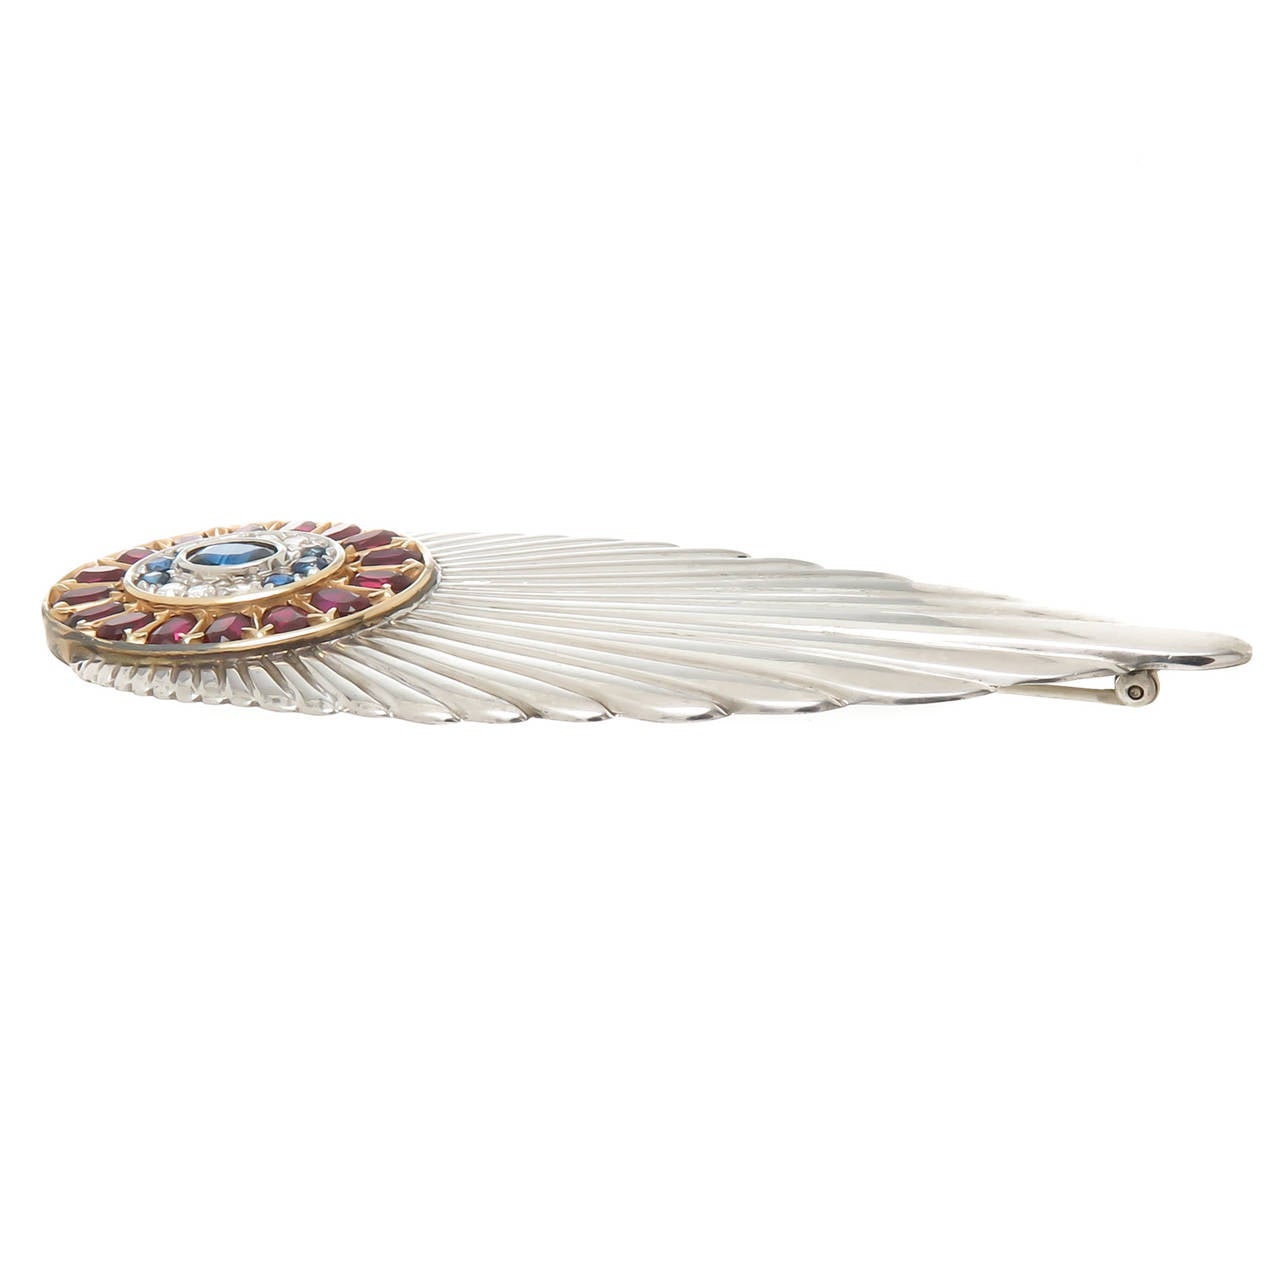 Circa 1980 Erte 14K yellow Gold and sterling silver Deco feather Brooch, set with Diamonds, Sapphires and Garnets. Measures 3 1/2 inch in Length and 1 3/8 Inch wide. With Original box from Circle Fine Art Galleries, the exclusive retailer of Erte